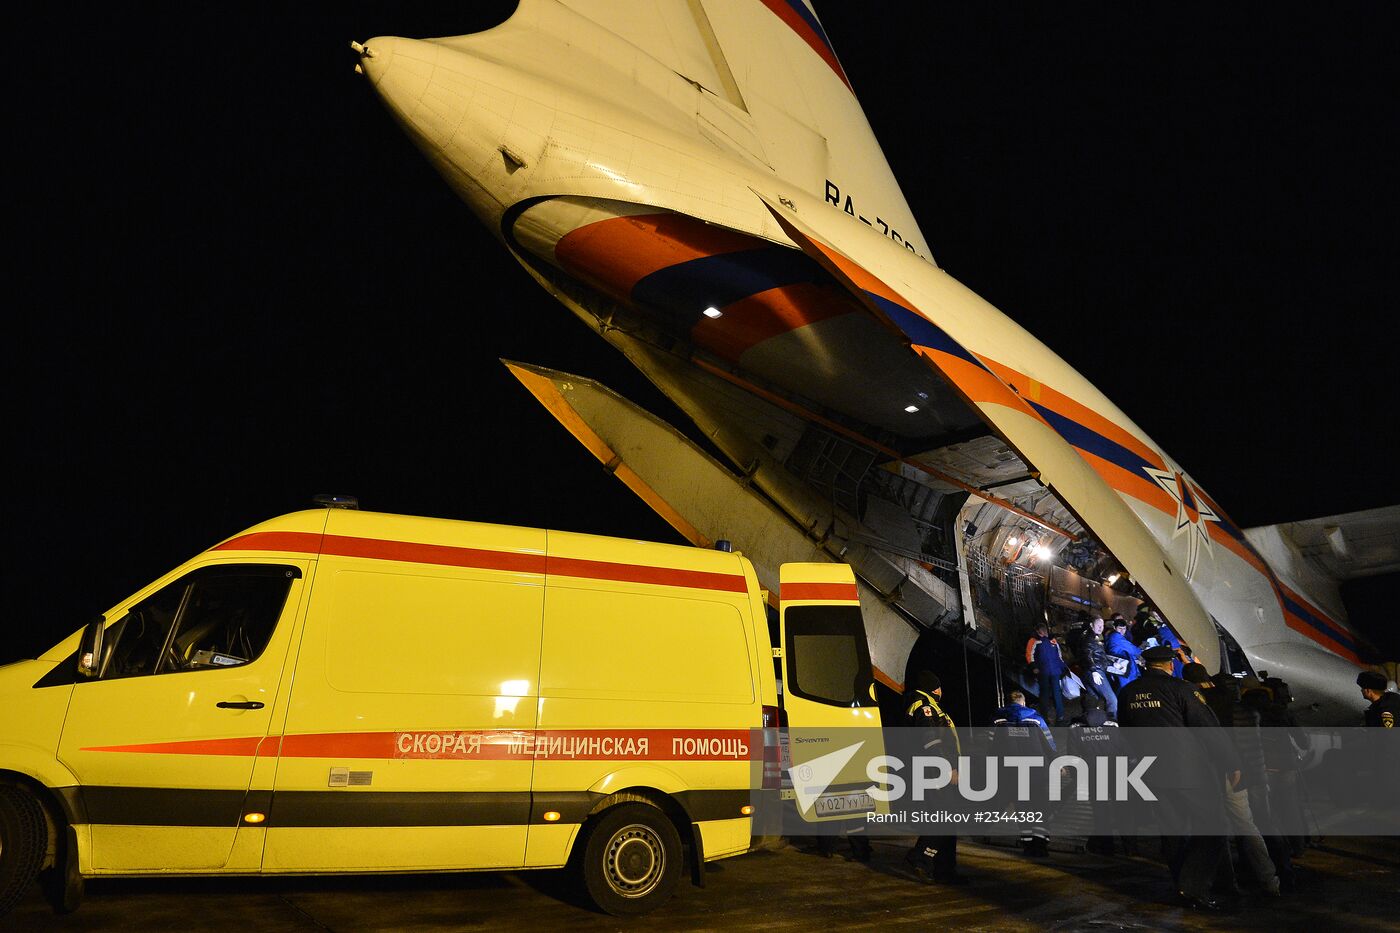 EMERCOM flight arrives in Moscow with terror attack victims